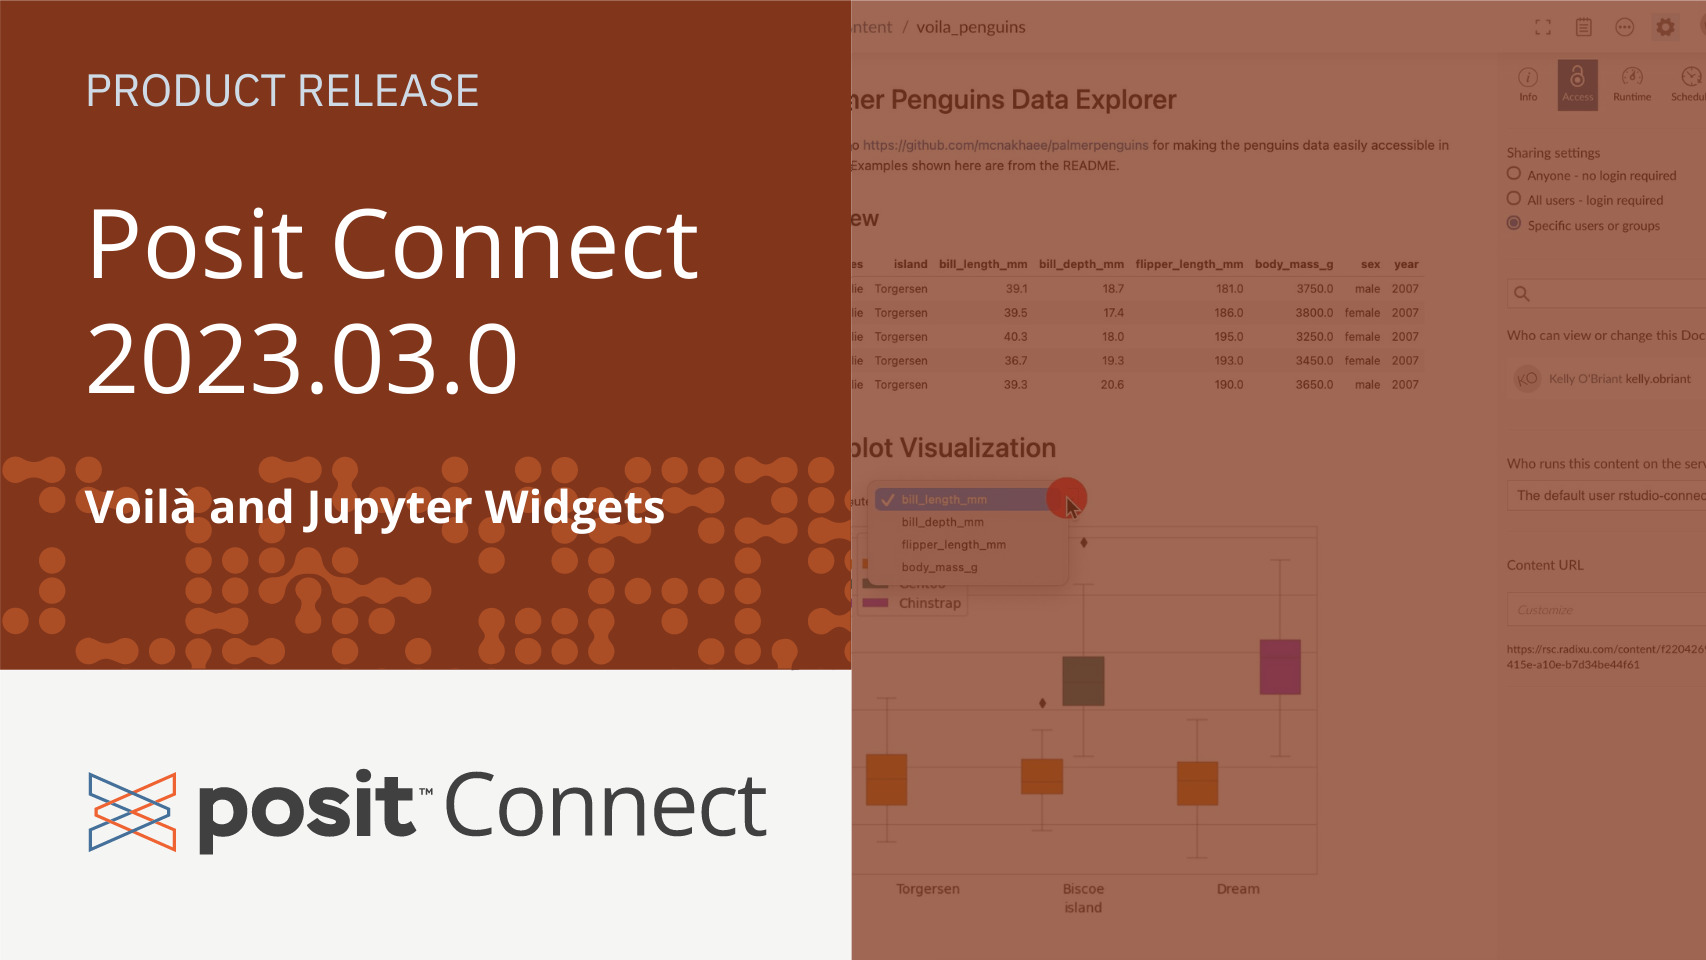 Text: "Product Release, Posit Connect 2023.03.0 Voila and Jupyter Widgets." Posit Connect logo. On the right, a screenshot of a Jupyter notebook with an interactive plot published on Connect.